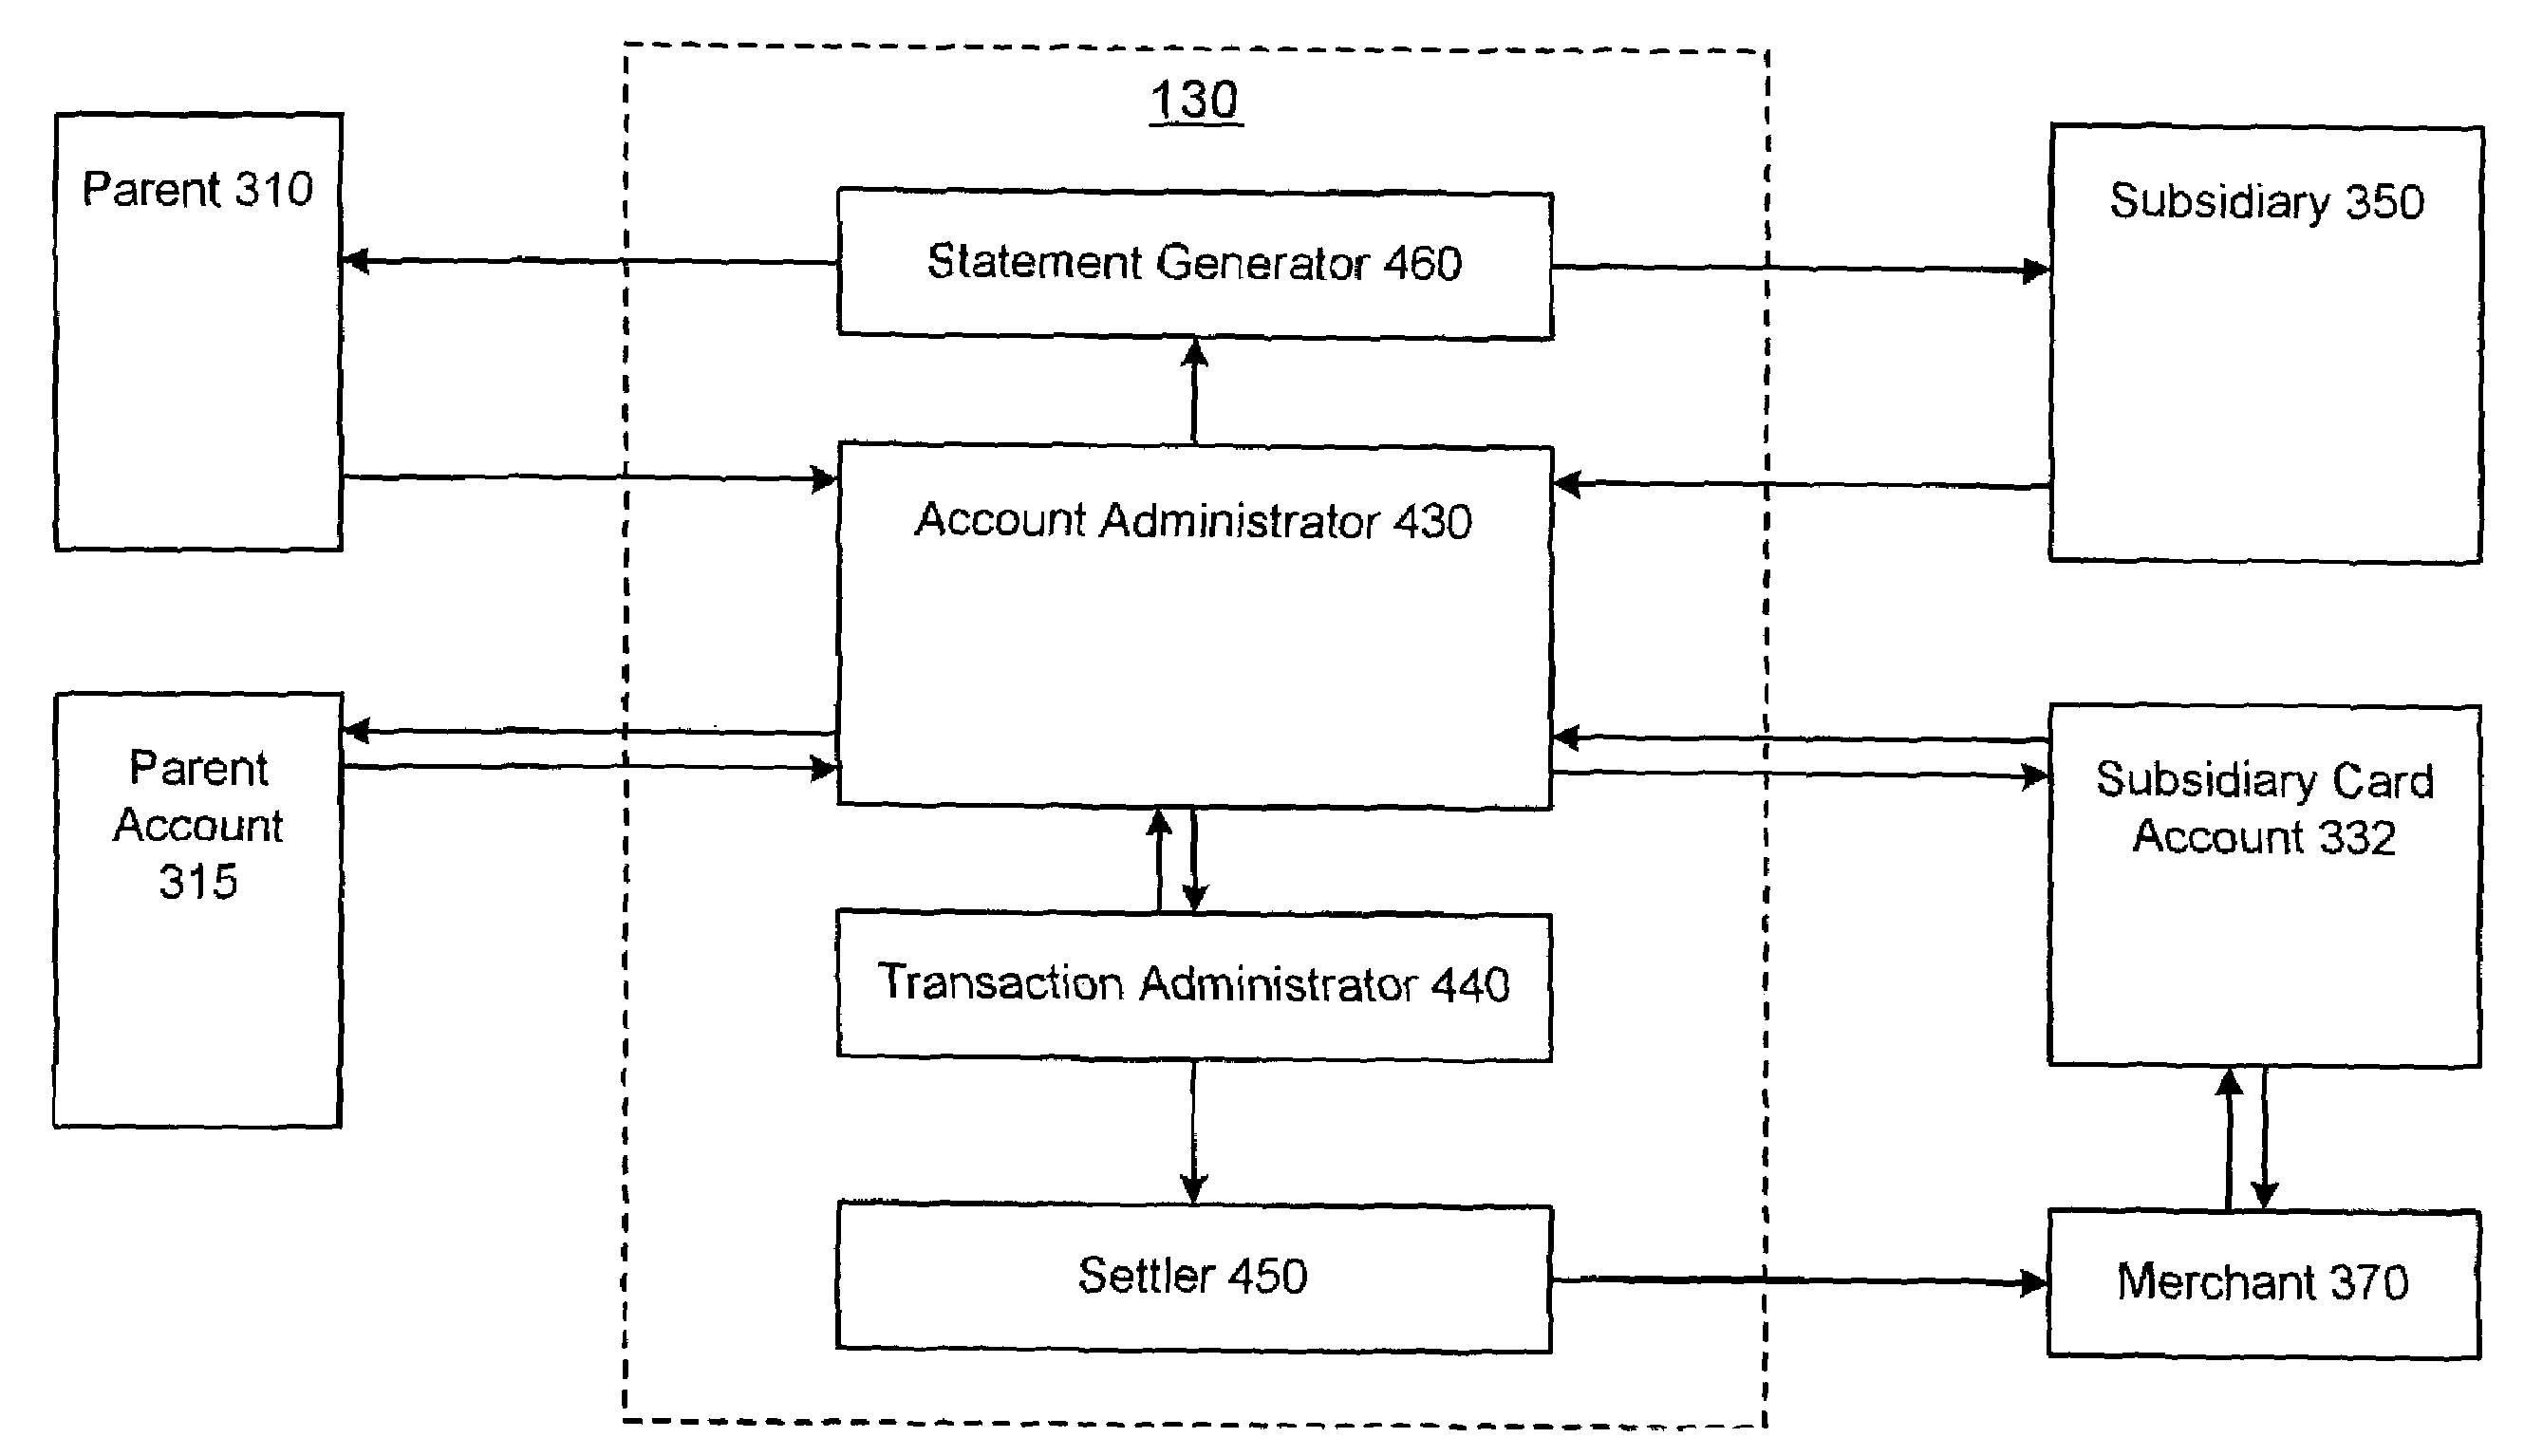 System and method for facilitating a subsidiary card account with controlled spending capability